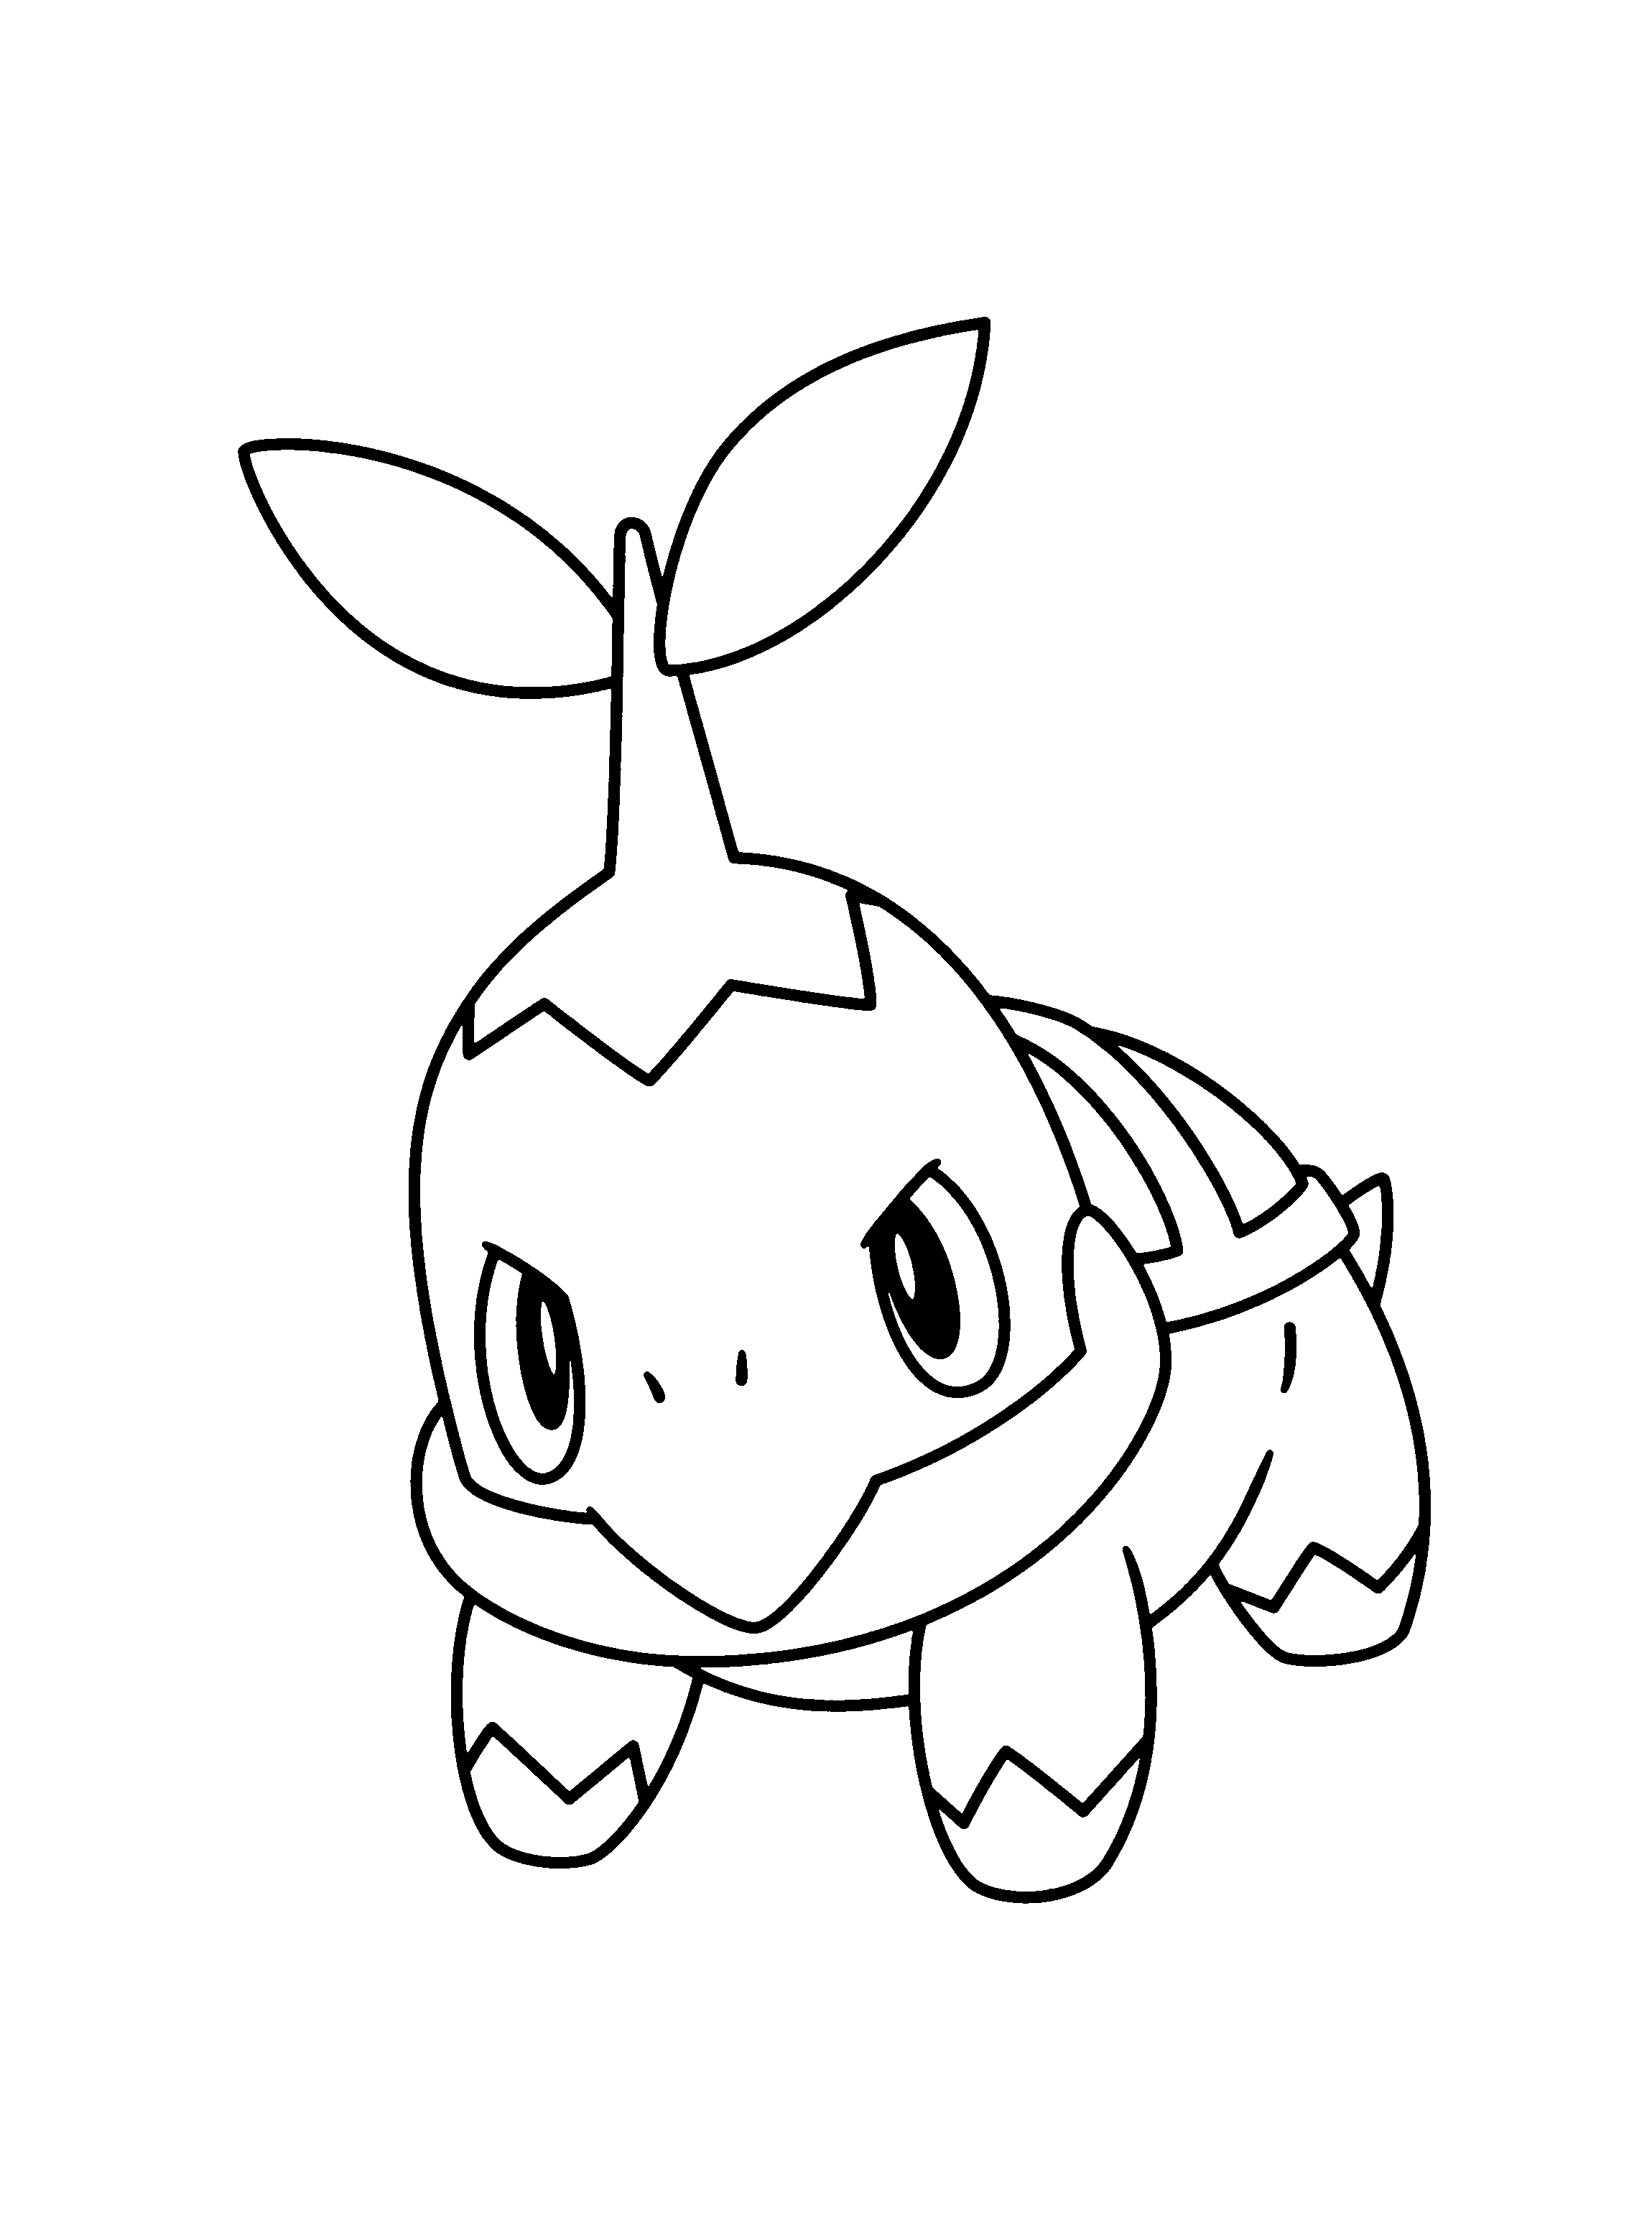 Animal Pokemon Piplup Coloring Pages 